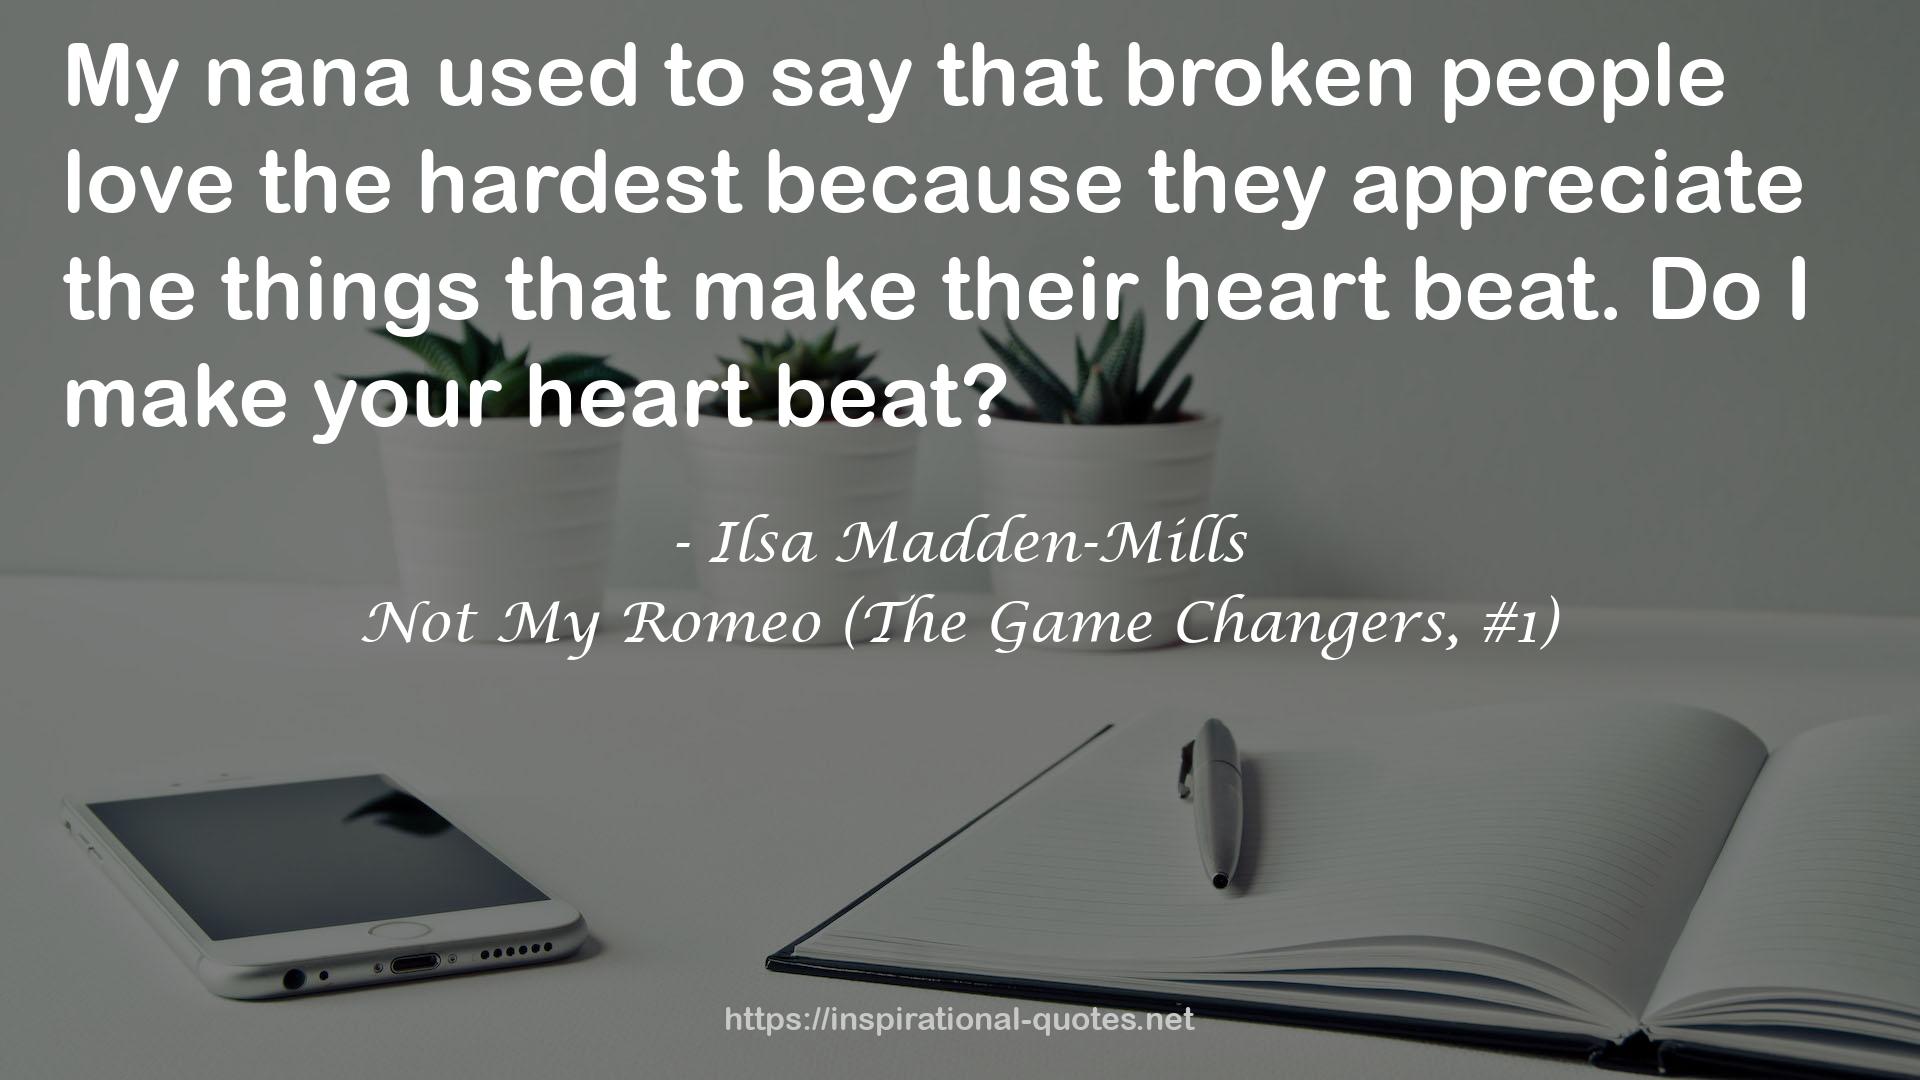 Not My Romeo (The Game Changers, #1) QUOTES